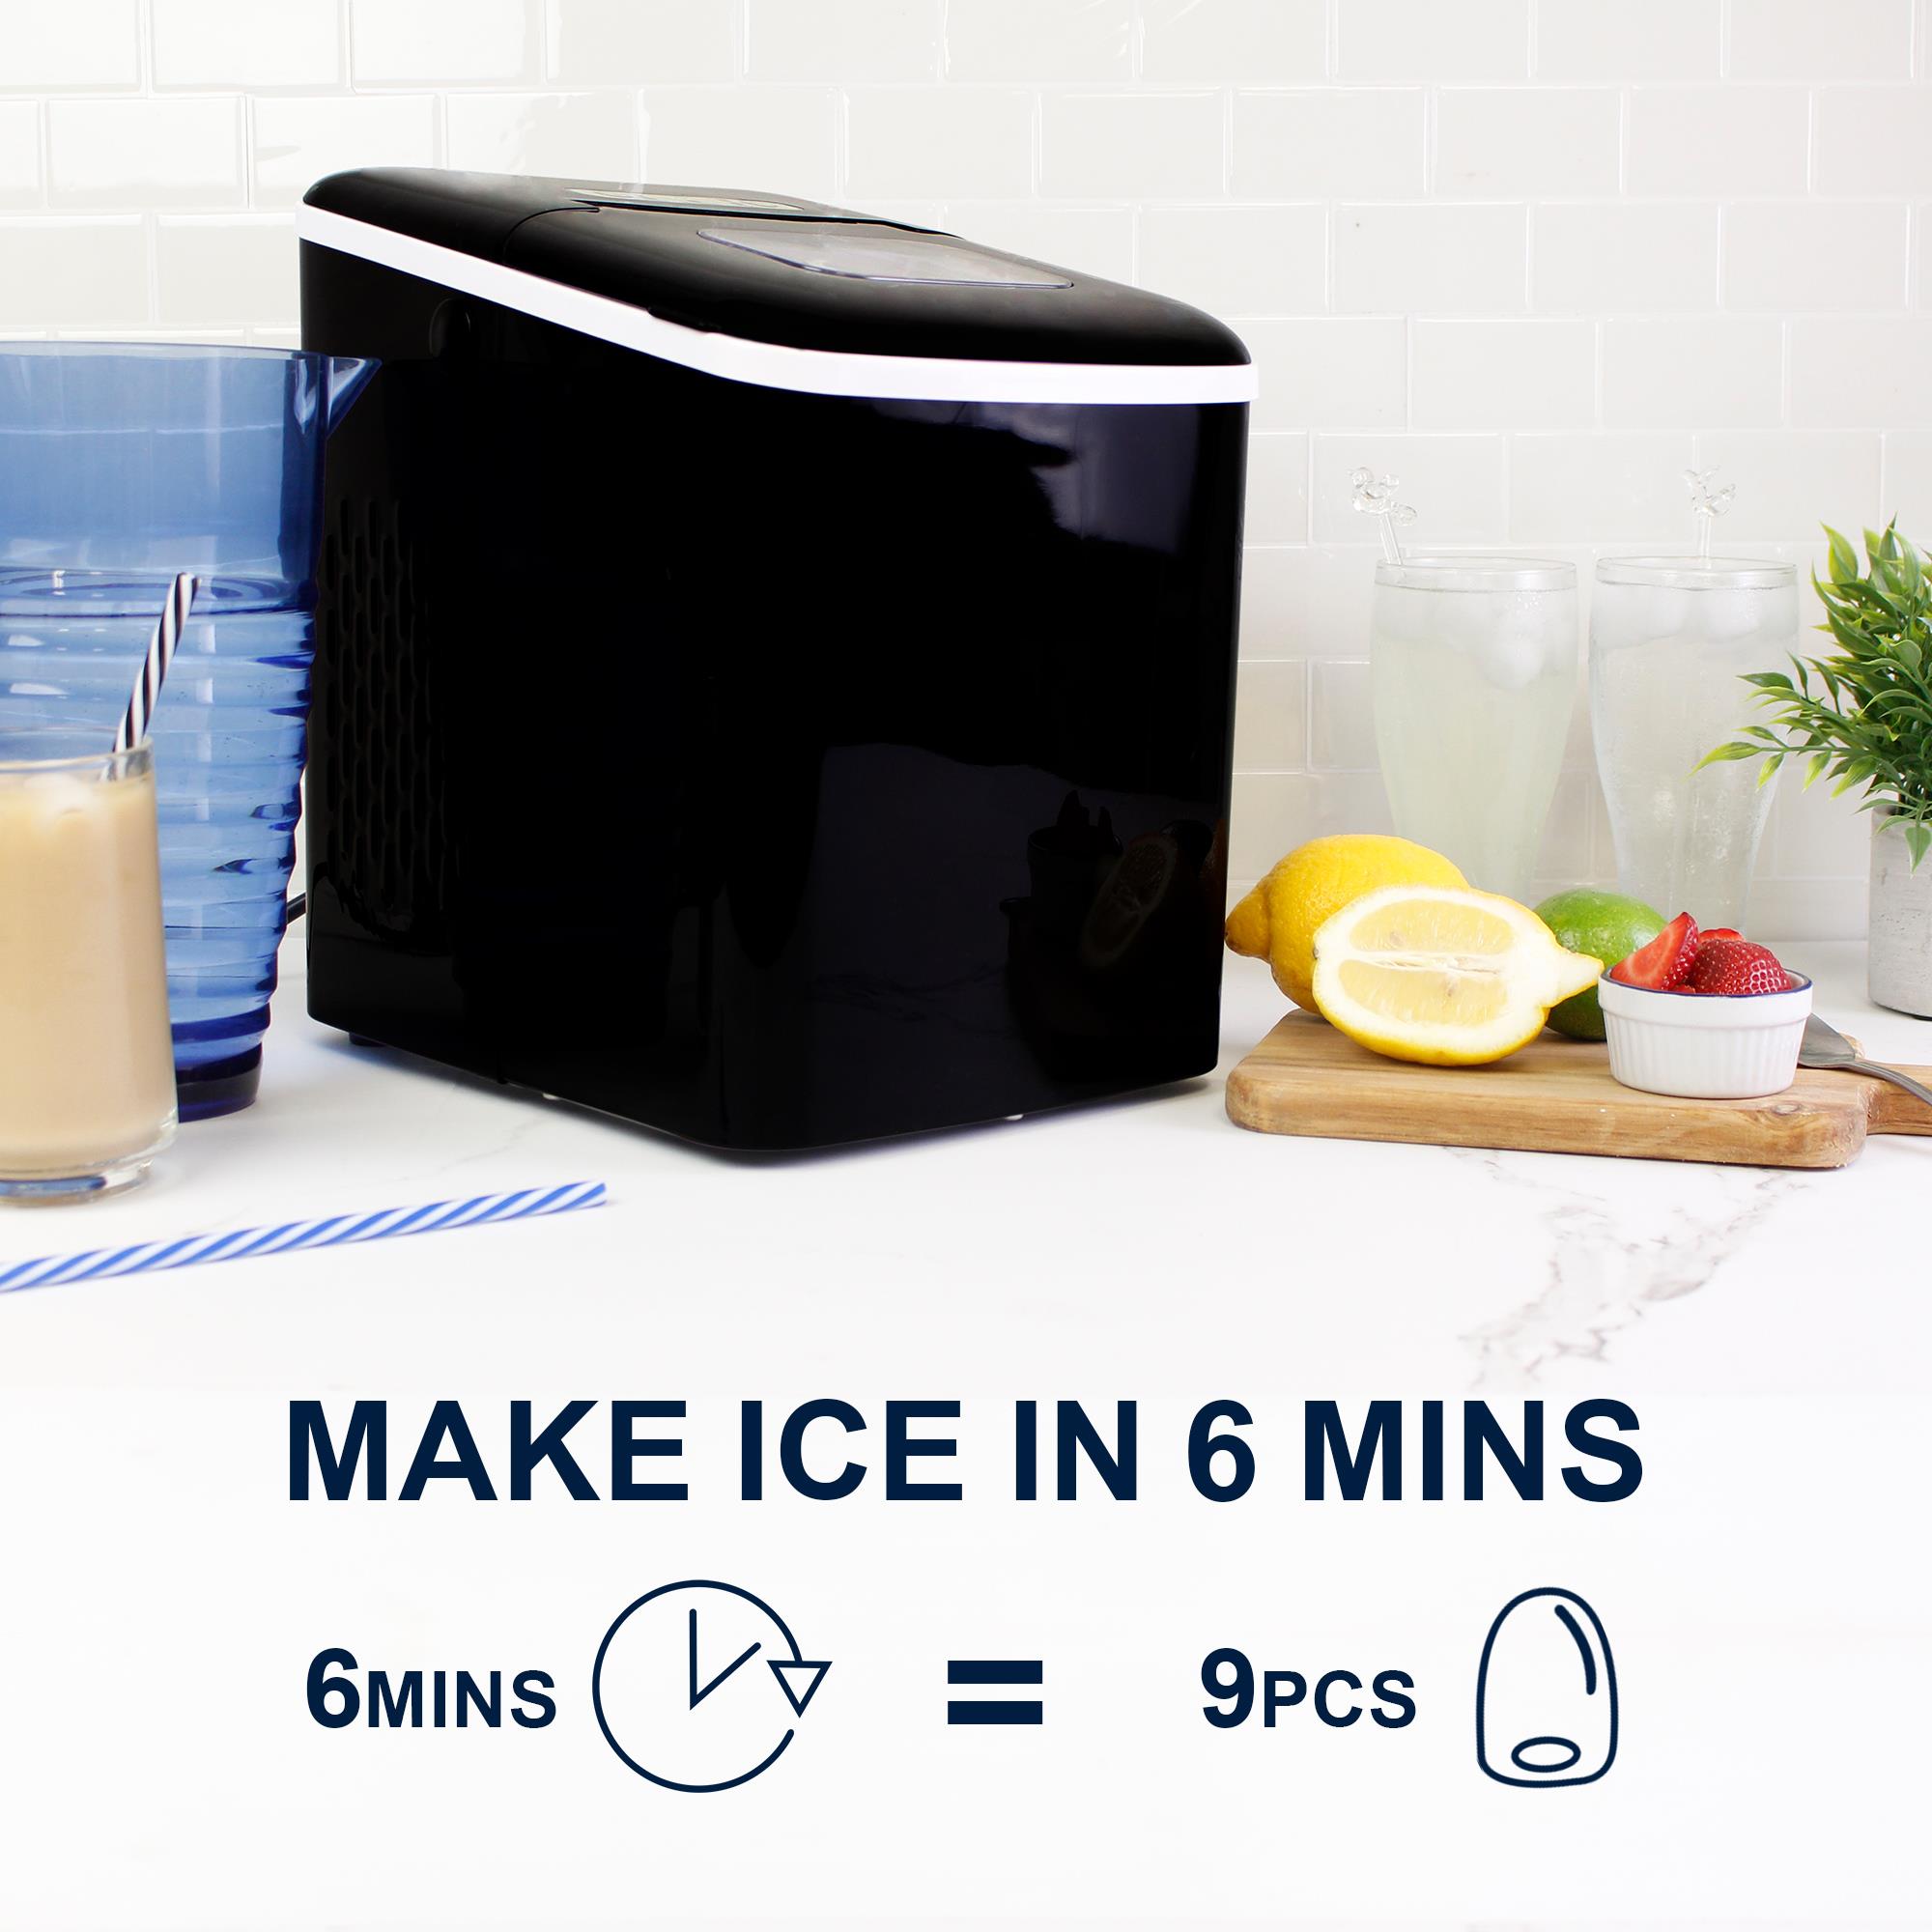 Shop Thereye Ice Makers and Milk Frothers. - Thereye